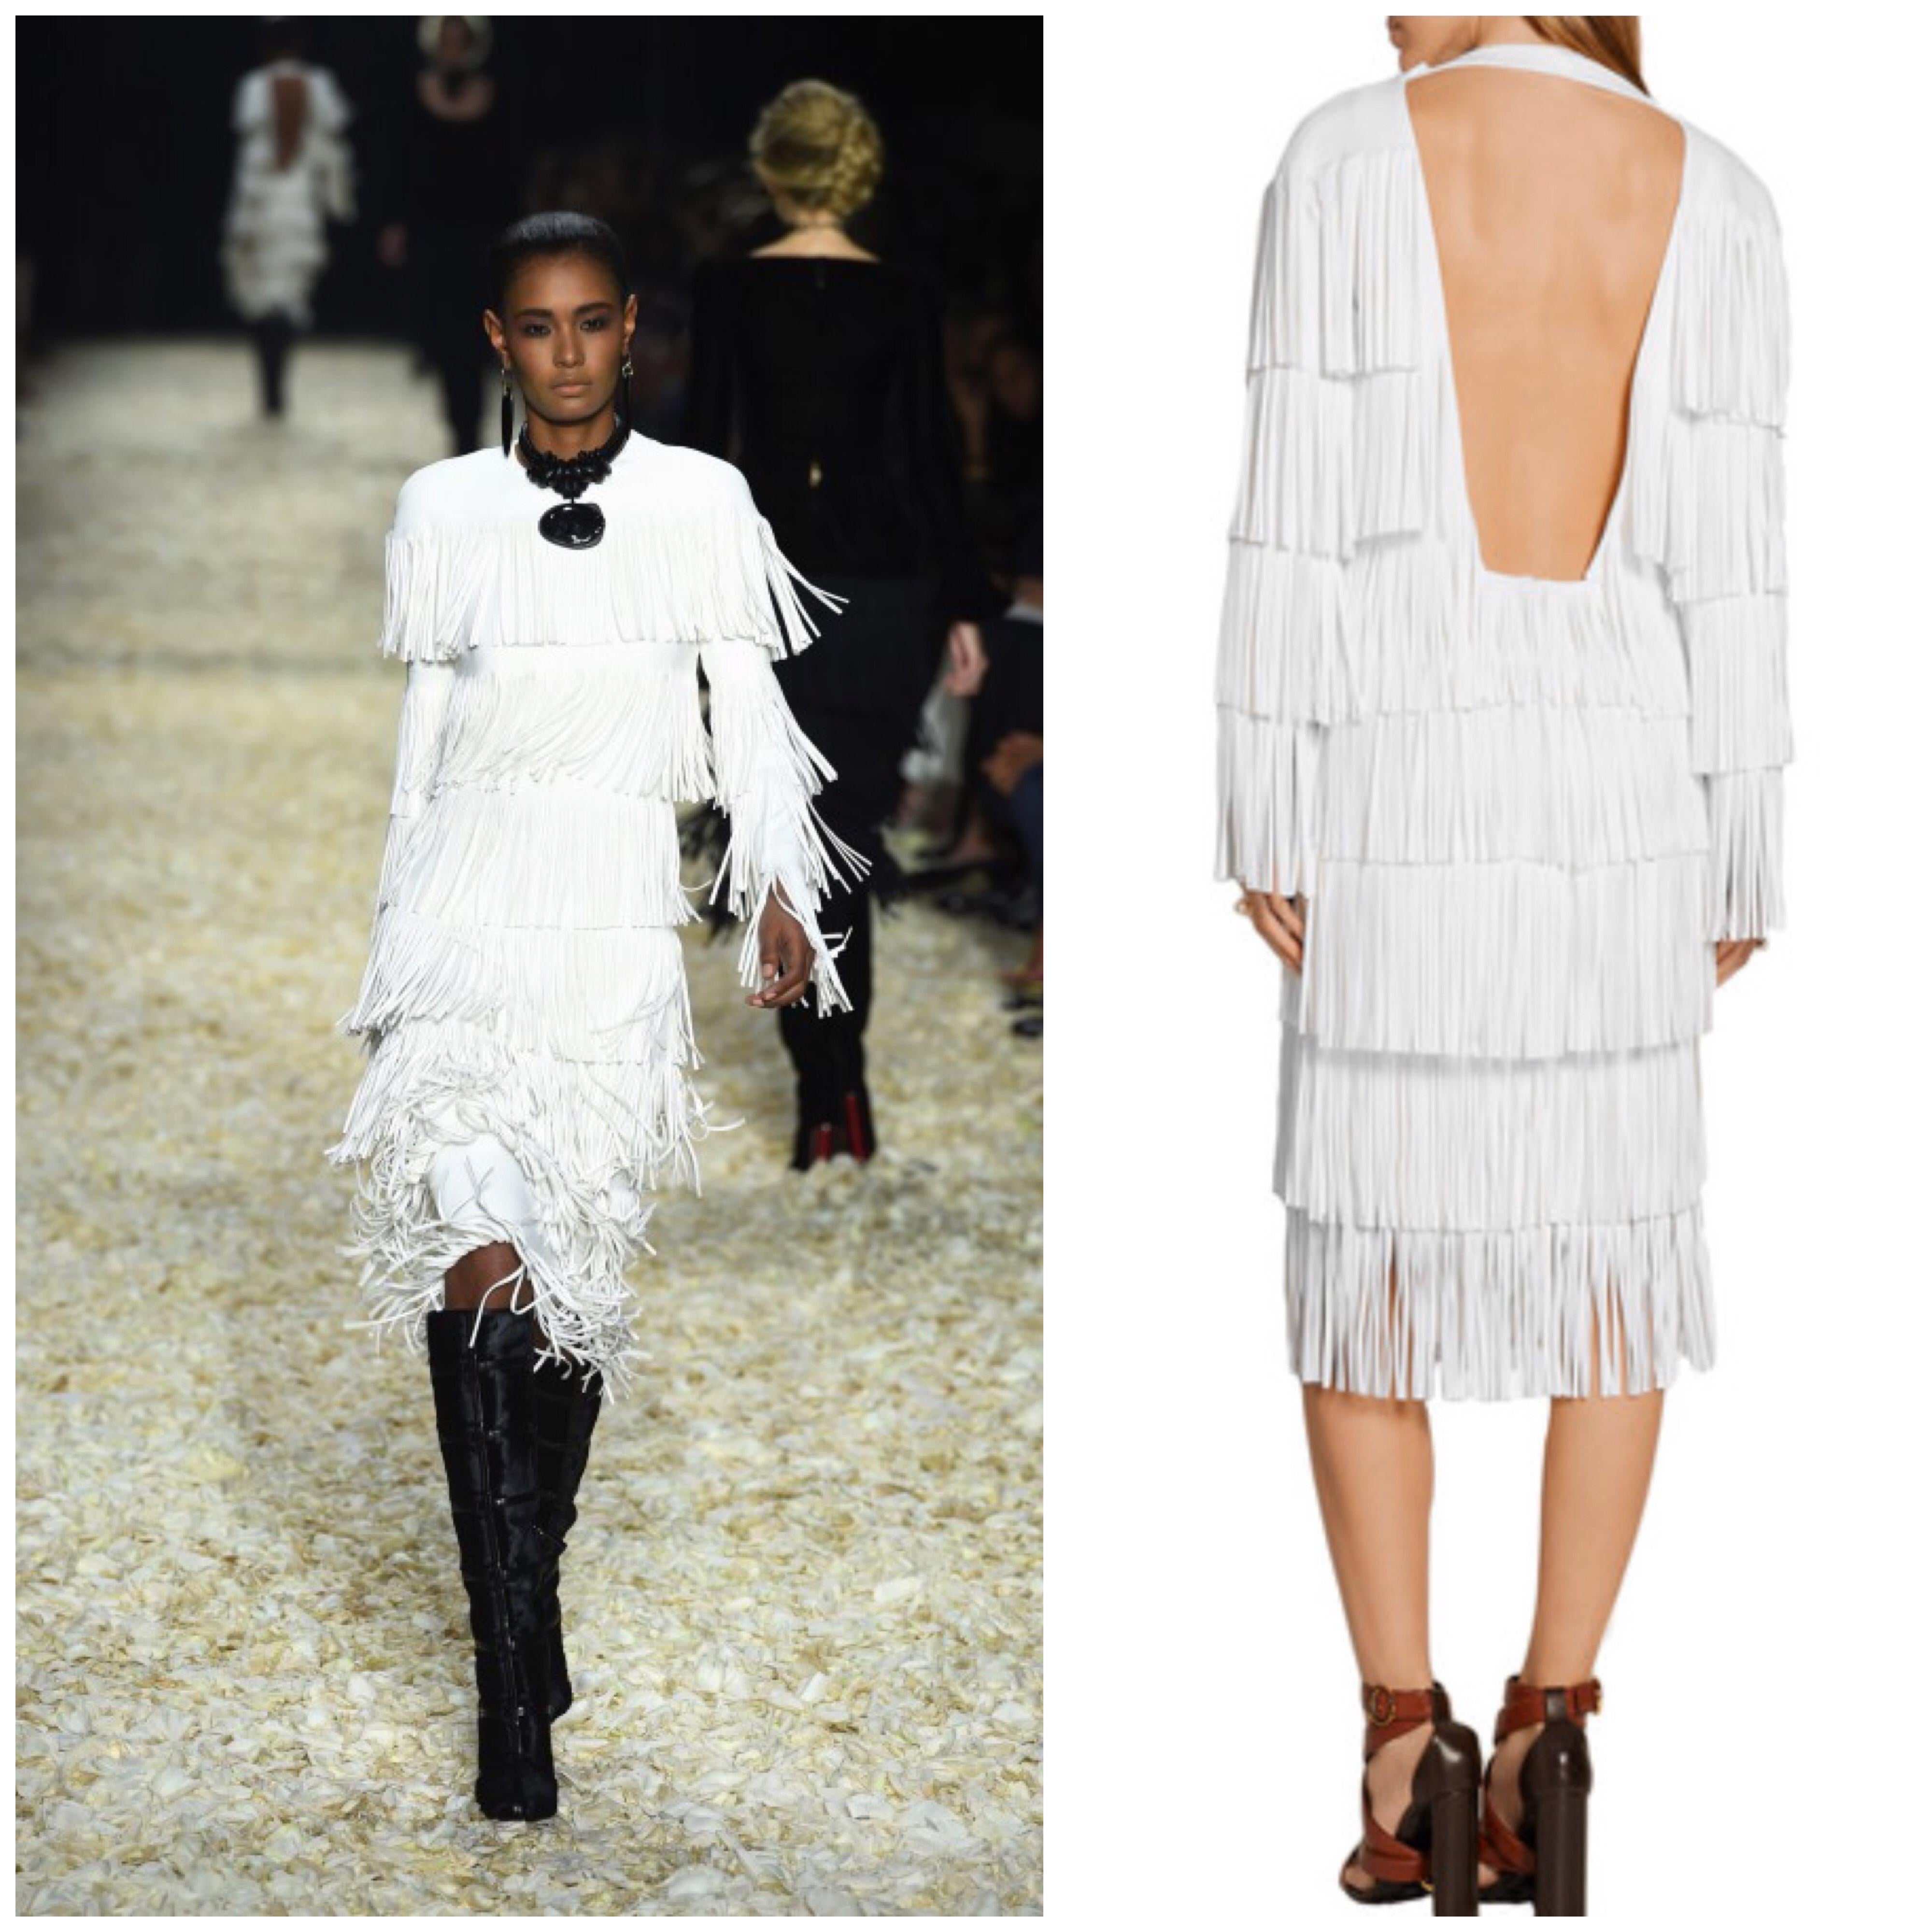 SOLD OUT Brand new with tags TOM FORD Fall 2015 runway white fringe flapper style dress! Impeccably designed, this rare gem features fabulous white tiers of fringe throughout on a rayon based crepe fabric. Open back reveals just the right amount of